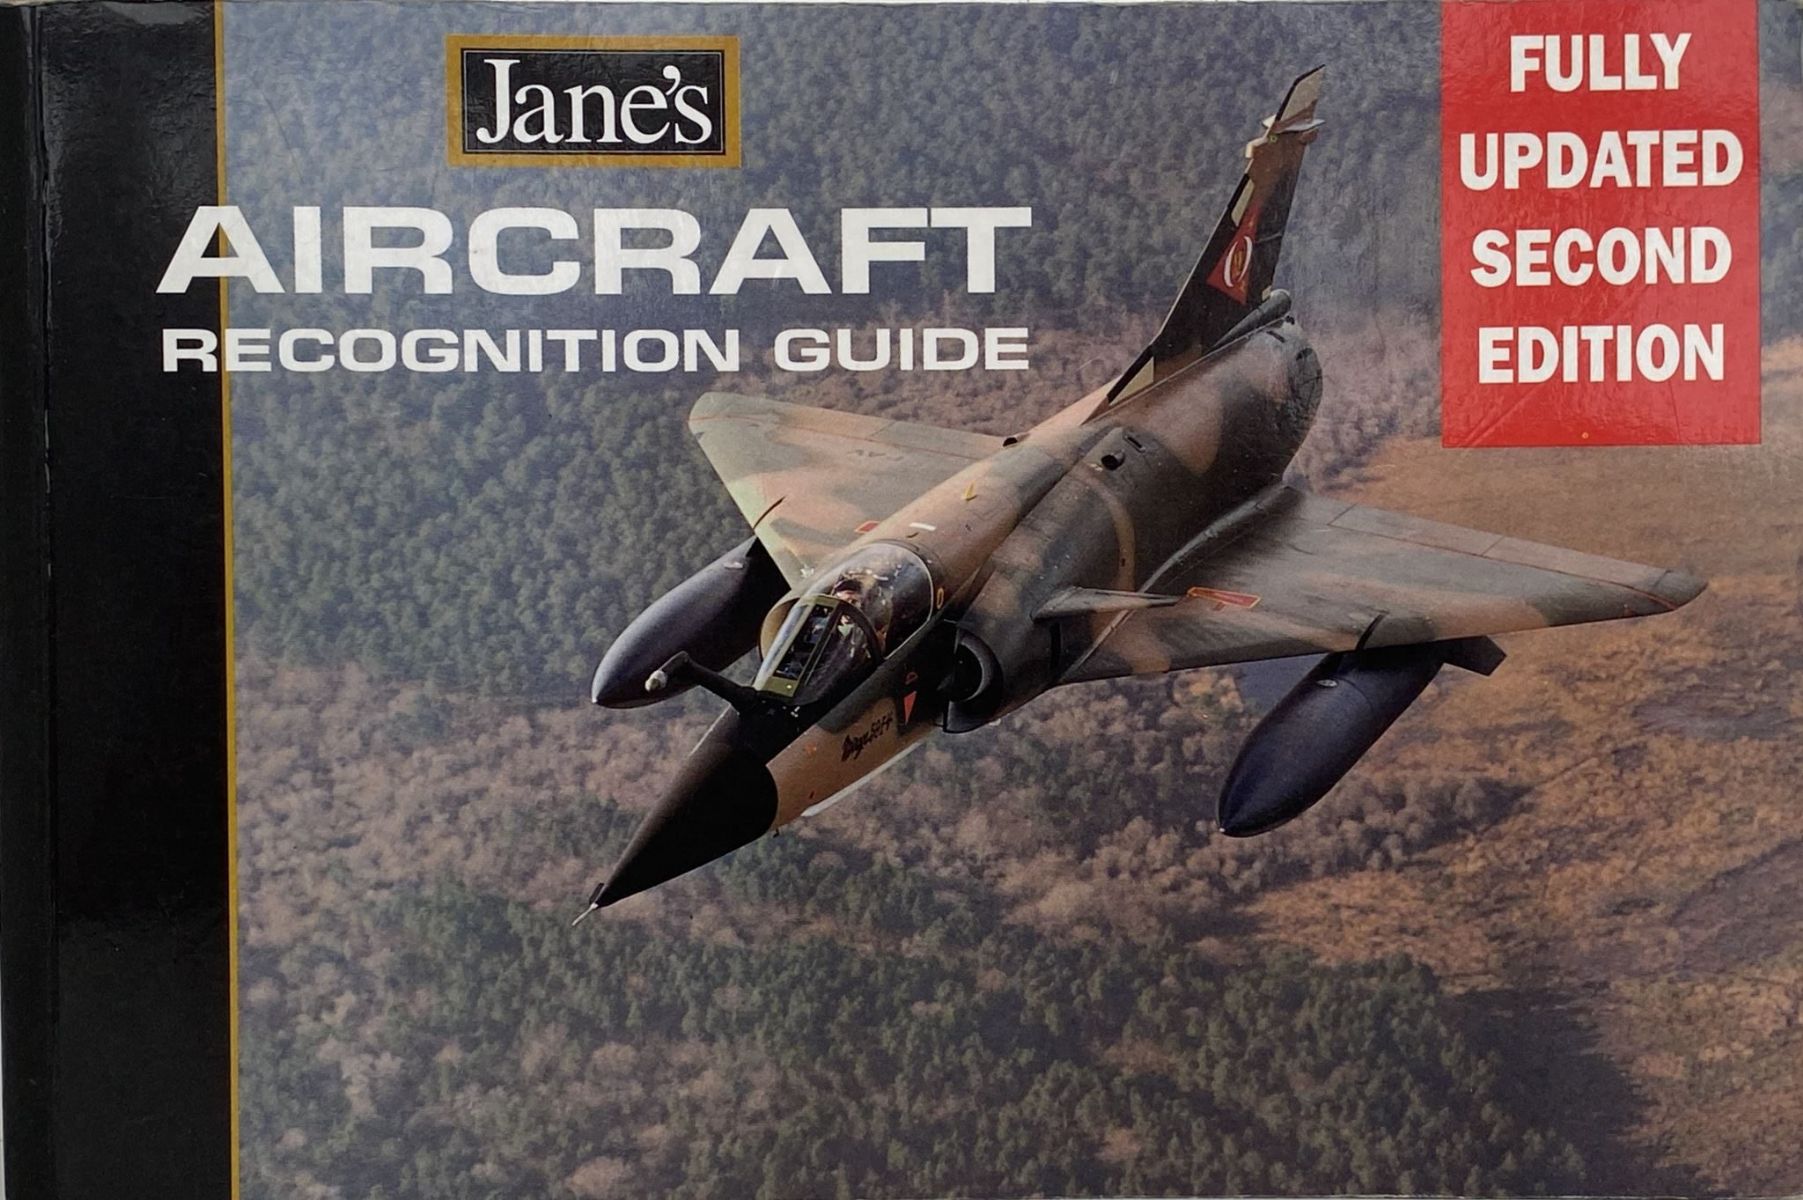 AIRCRAFT RECOGNITION GUIDE: Jane's - fully updated second edition